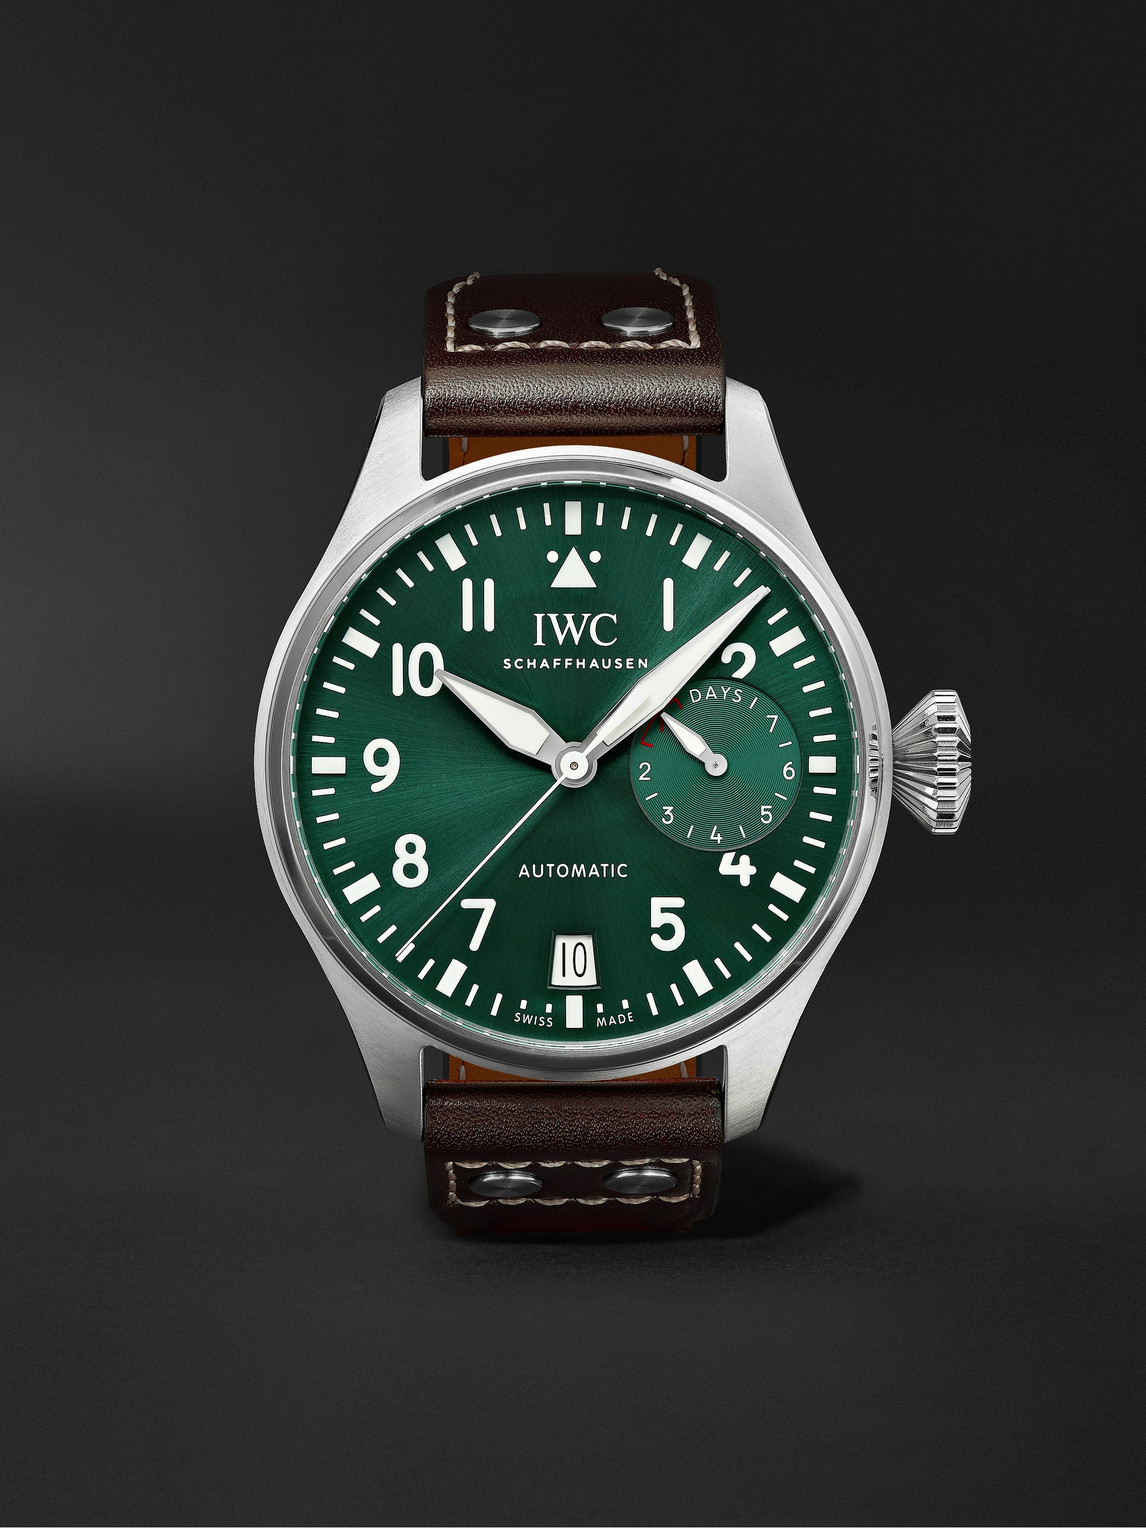 Iwc Schaffhausen Big Pilot's Automatic 46.2mm Stainless Steel And Leather Watch, Ref. No. Iw501015 In Green